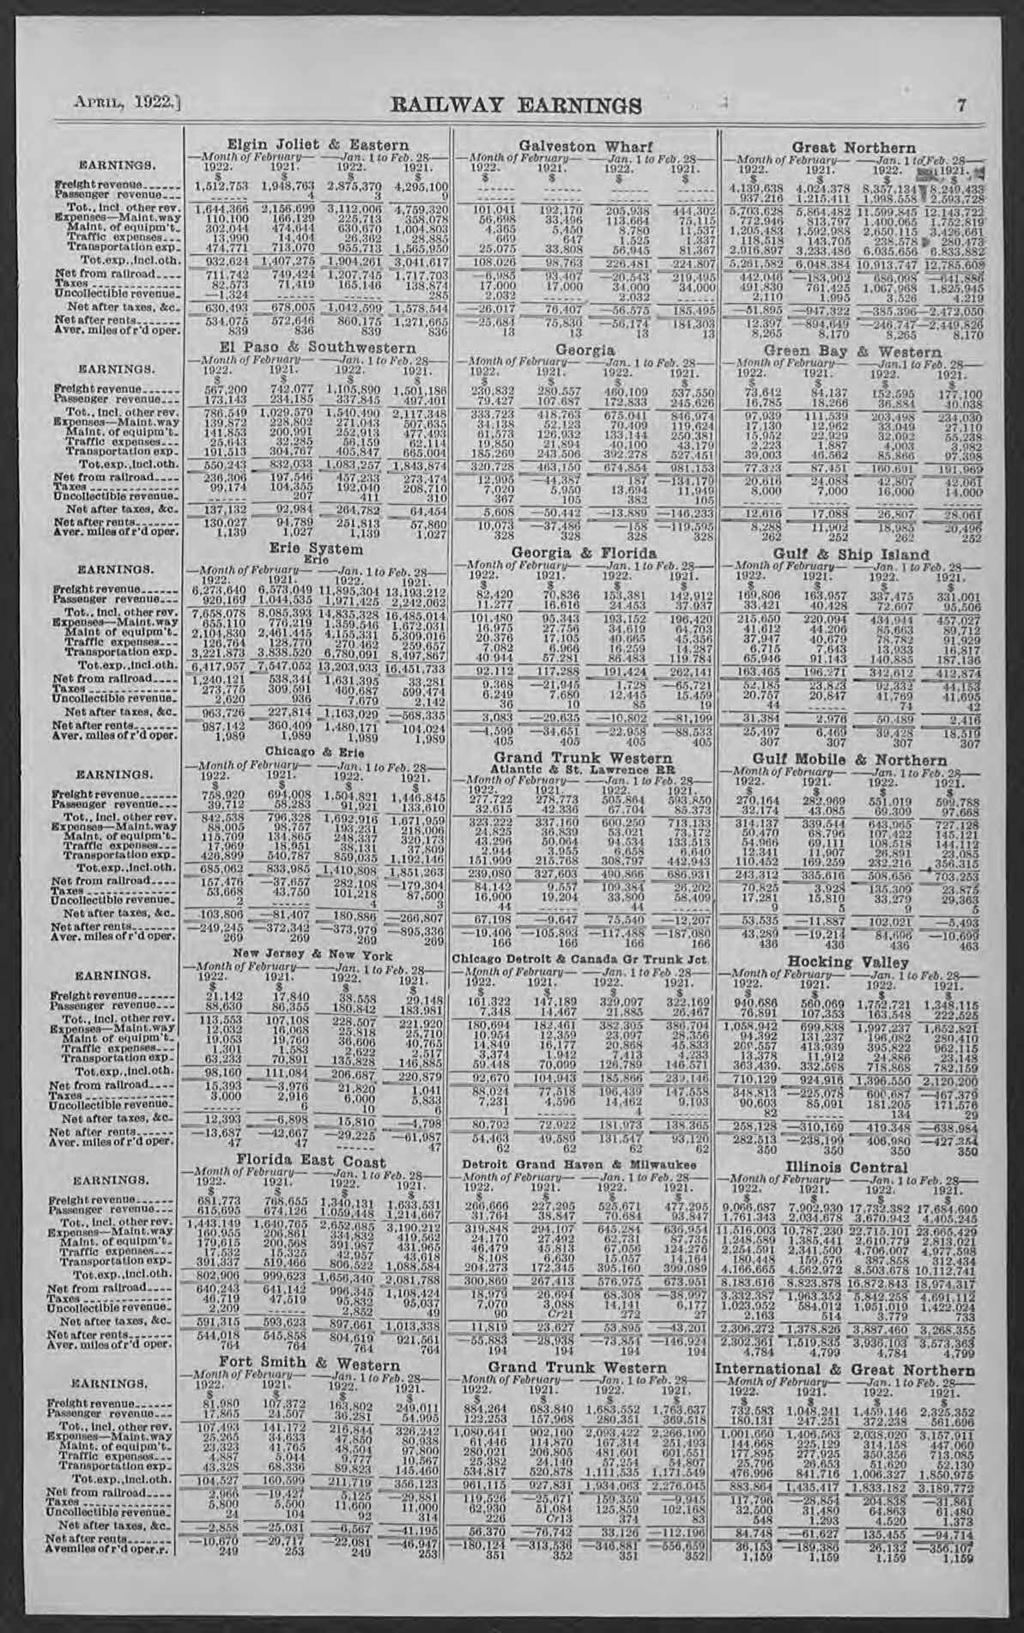 6,469 APRIL, 1922.3 RAILWAY EARNINGS. ; 7.... Tot.. Wel other rev. Maint. of equipml_ Tot.exp..incl.oth. Net from railroad.._ - Tot., incl. other rev. Exioenses-Maint.way.. Tot.exp..incl.oth. Net from railroad.,..._... Expenses--Maint.